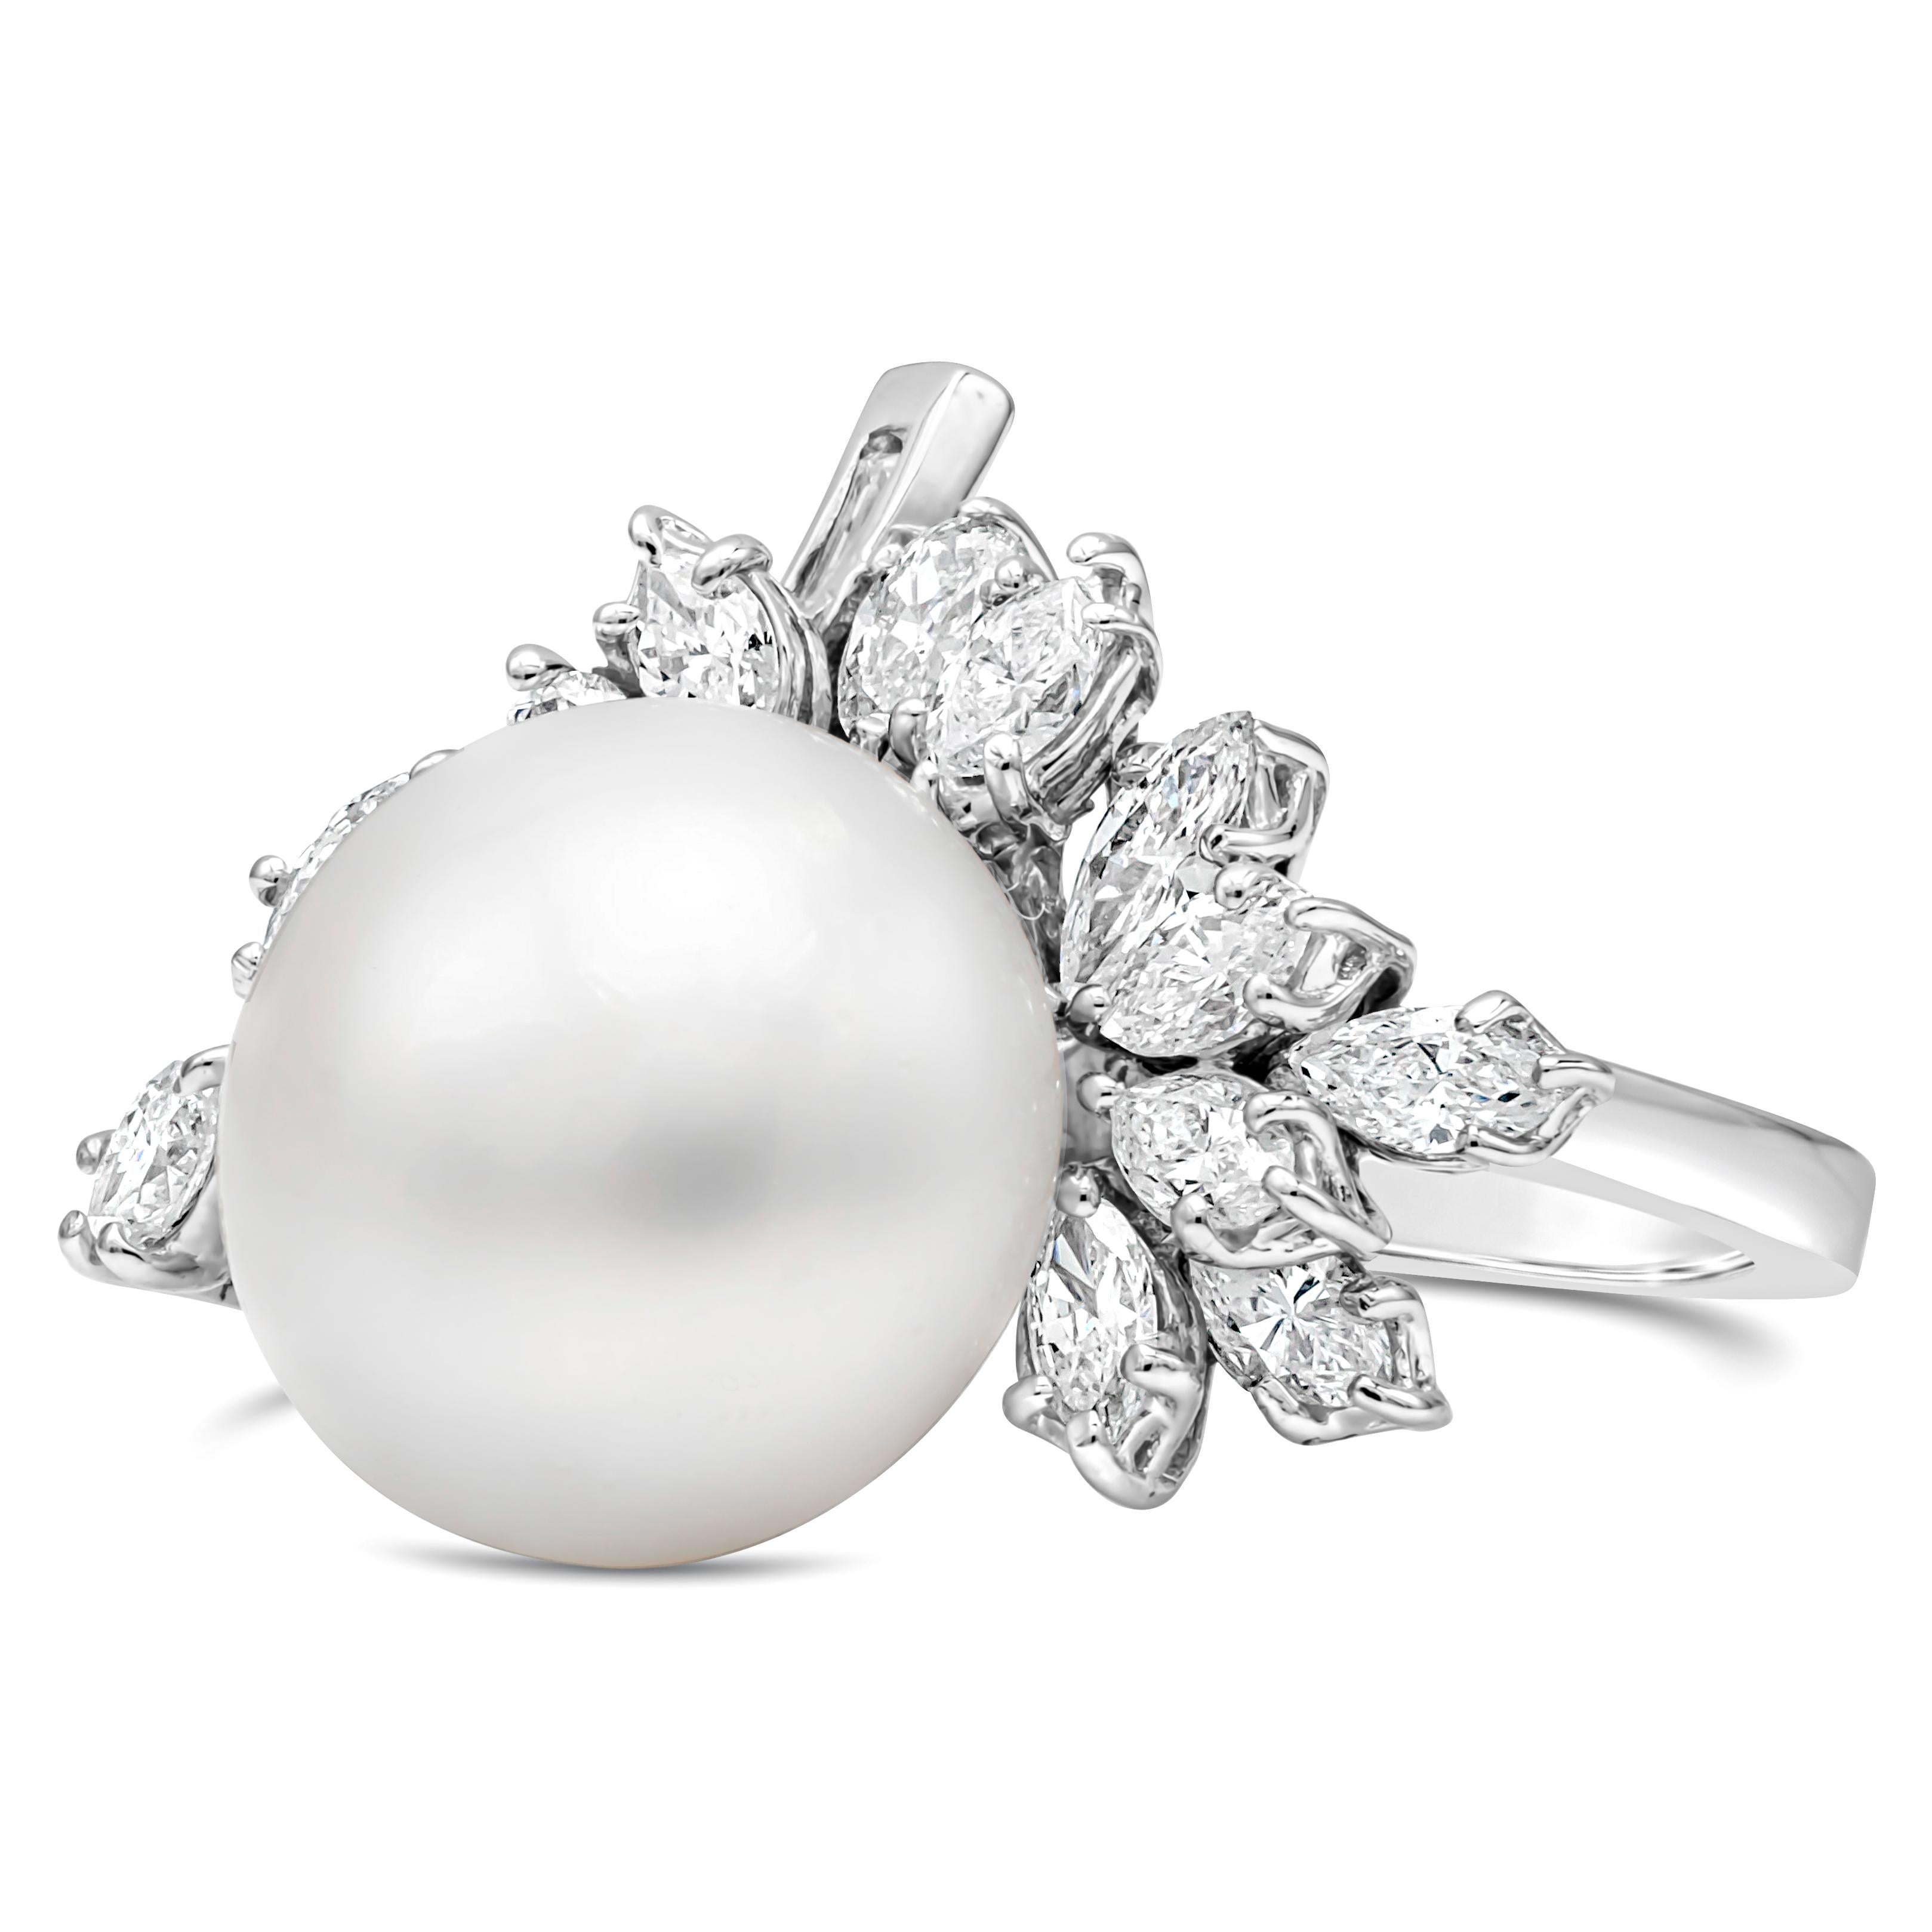 An elegant pearl and diamonds cocktail ring features a 14.50mm white south sea pearl, accented by a cluster of mixed-shape diamonds weighing 2.37 carats total. Made in 18K White Gold. 

Style available in different price ranges. Prices are based on